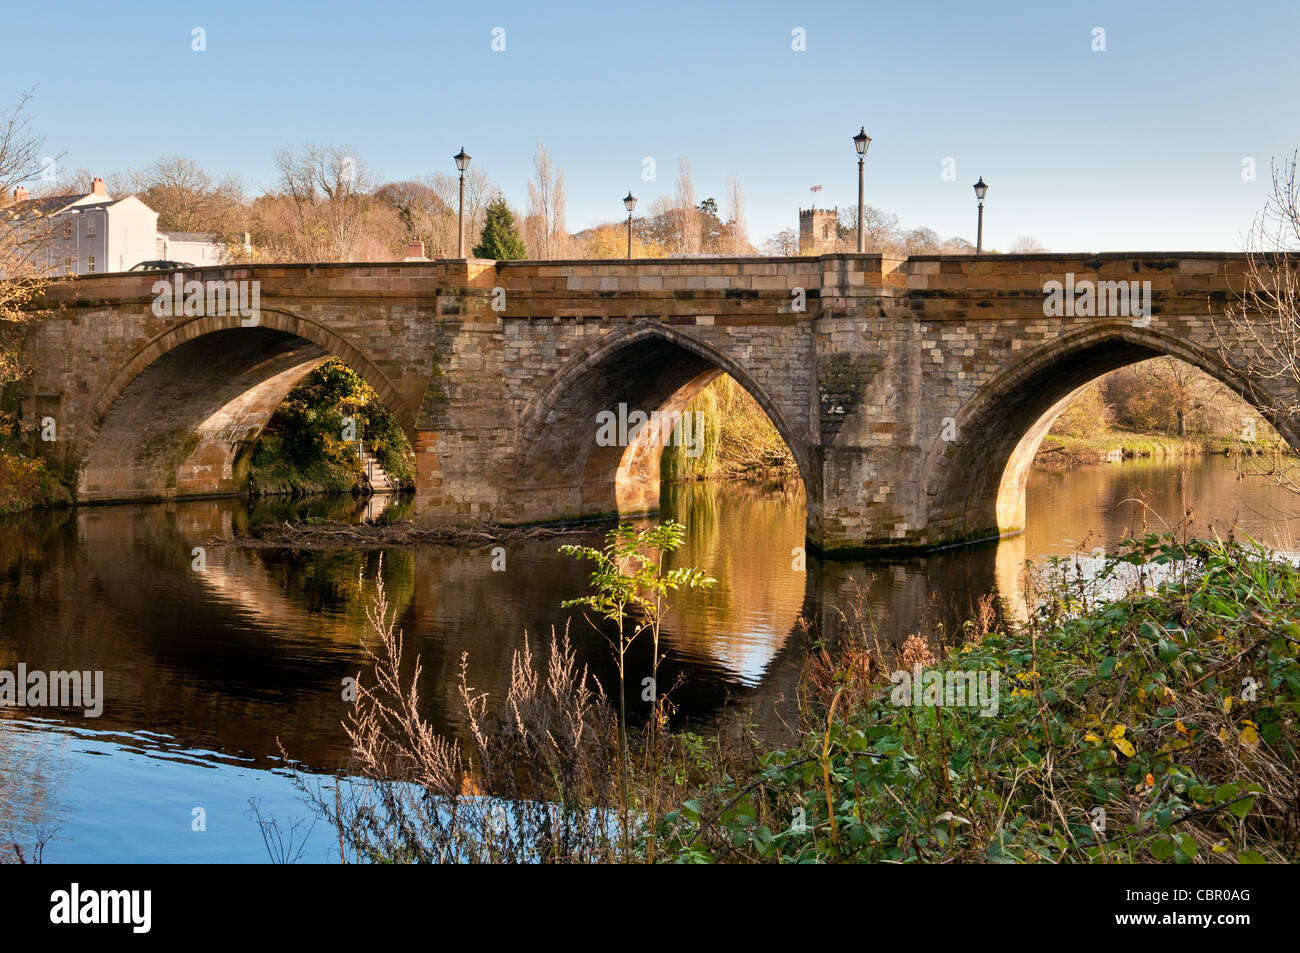 Road bridge at Yarm from the riverside path, autumn scene with reflections in River Tees Stock Photo